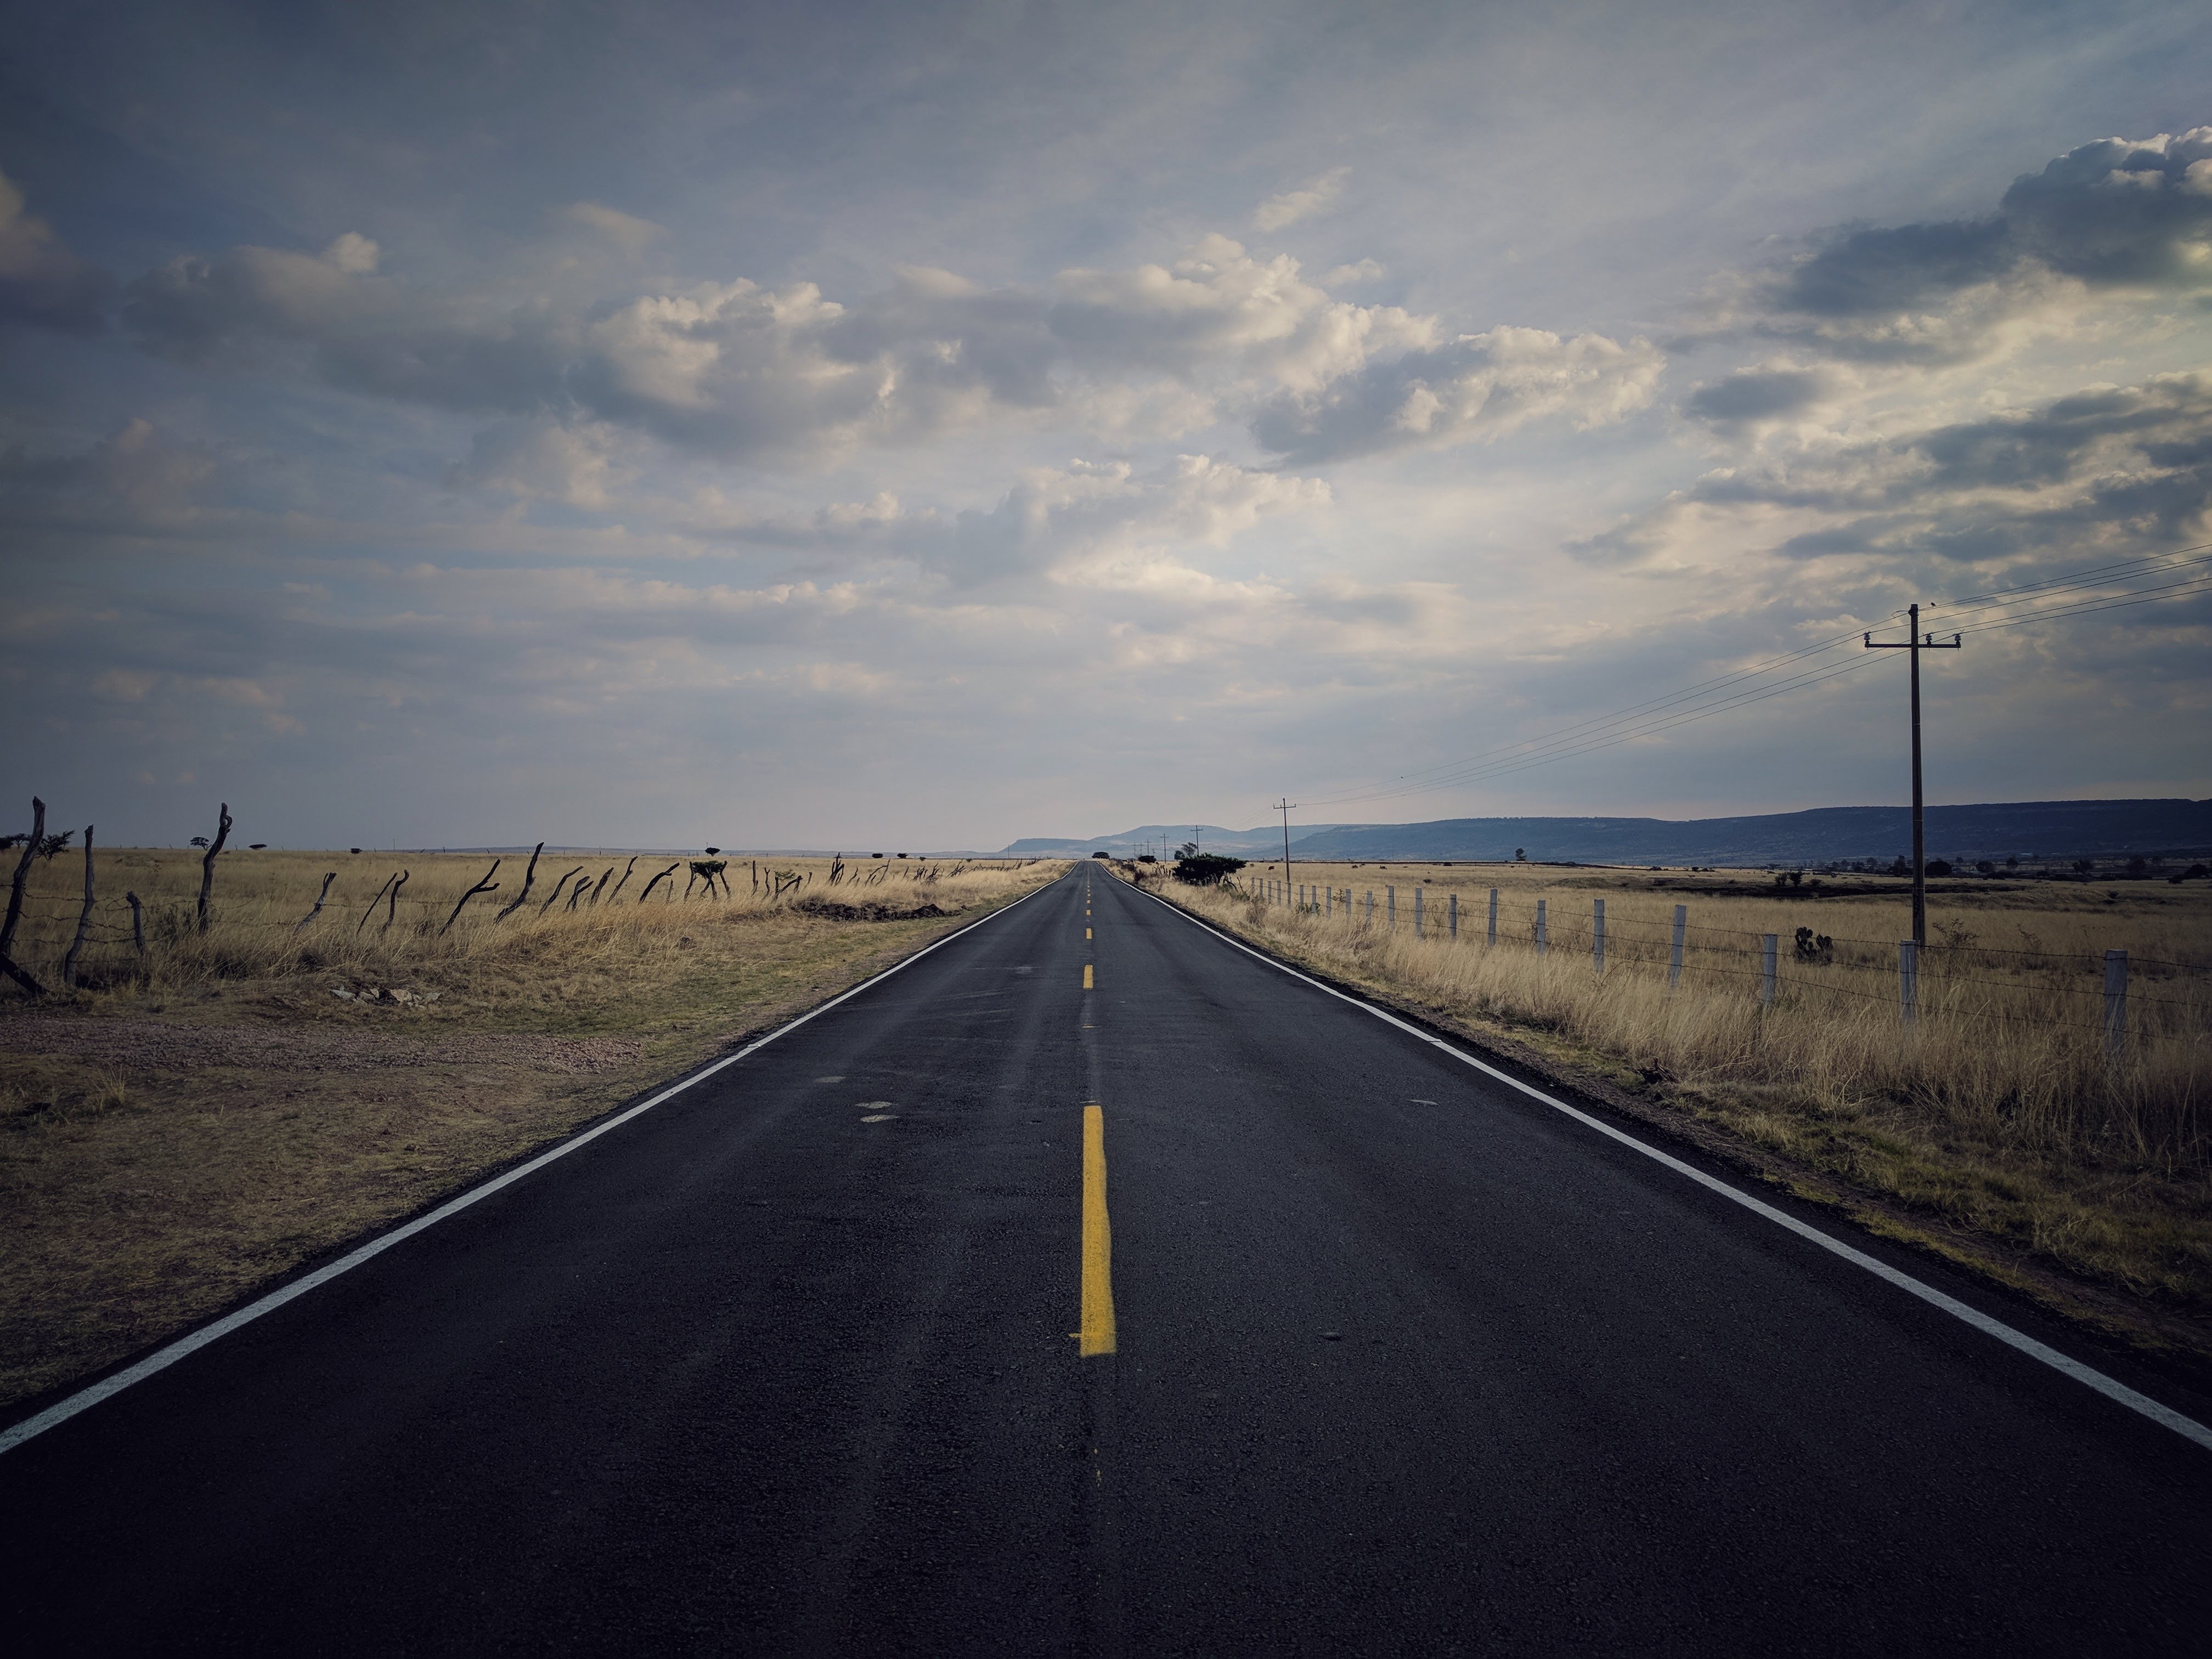 Landscape Photography of Pavement Road · Free Stock Photo